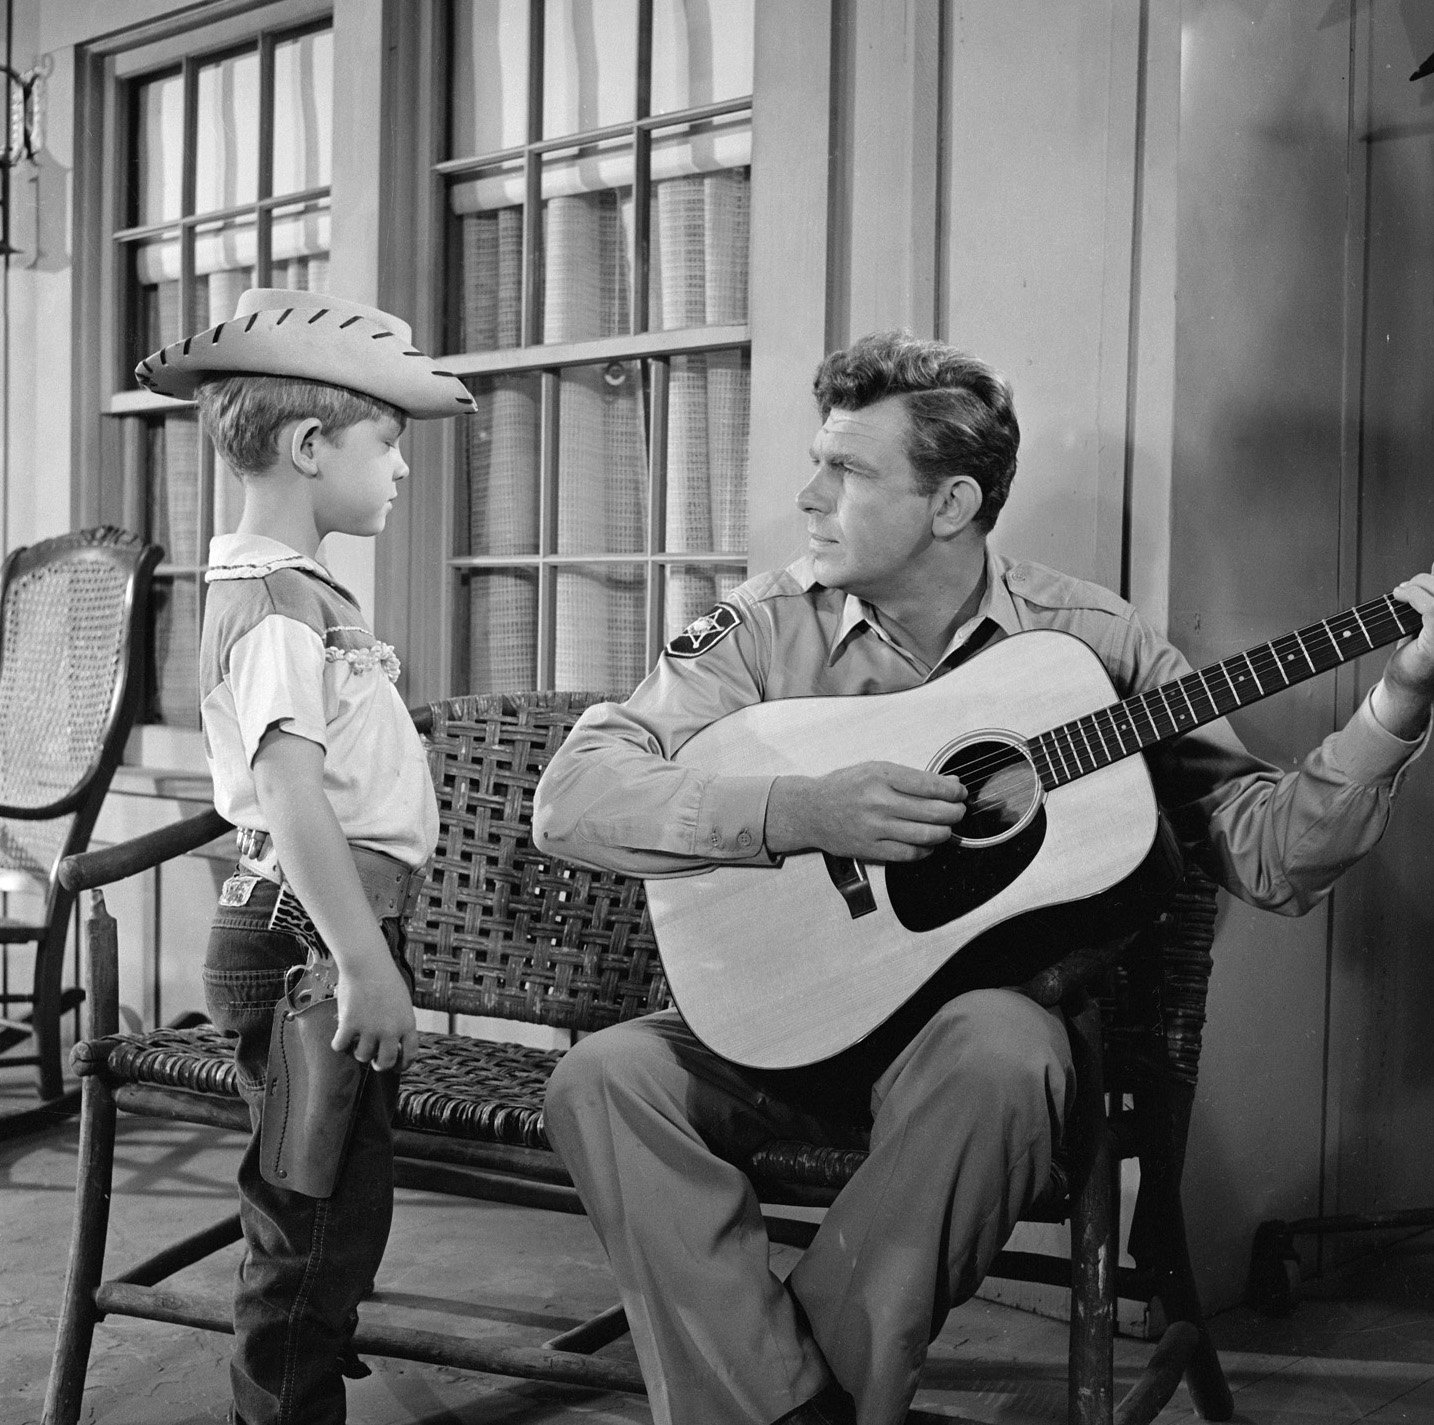 Actors Ron Howard and Andy Griffith in a scene from 'The Andy Griffith Show'